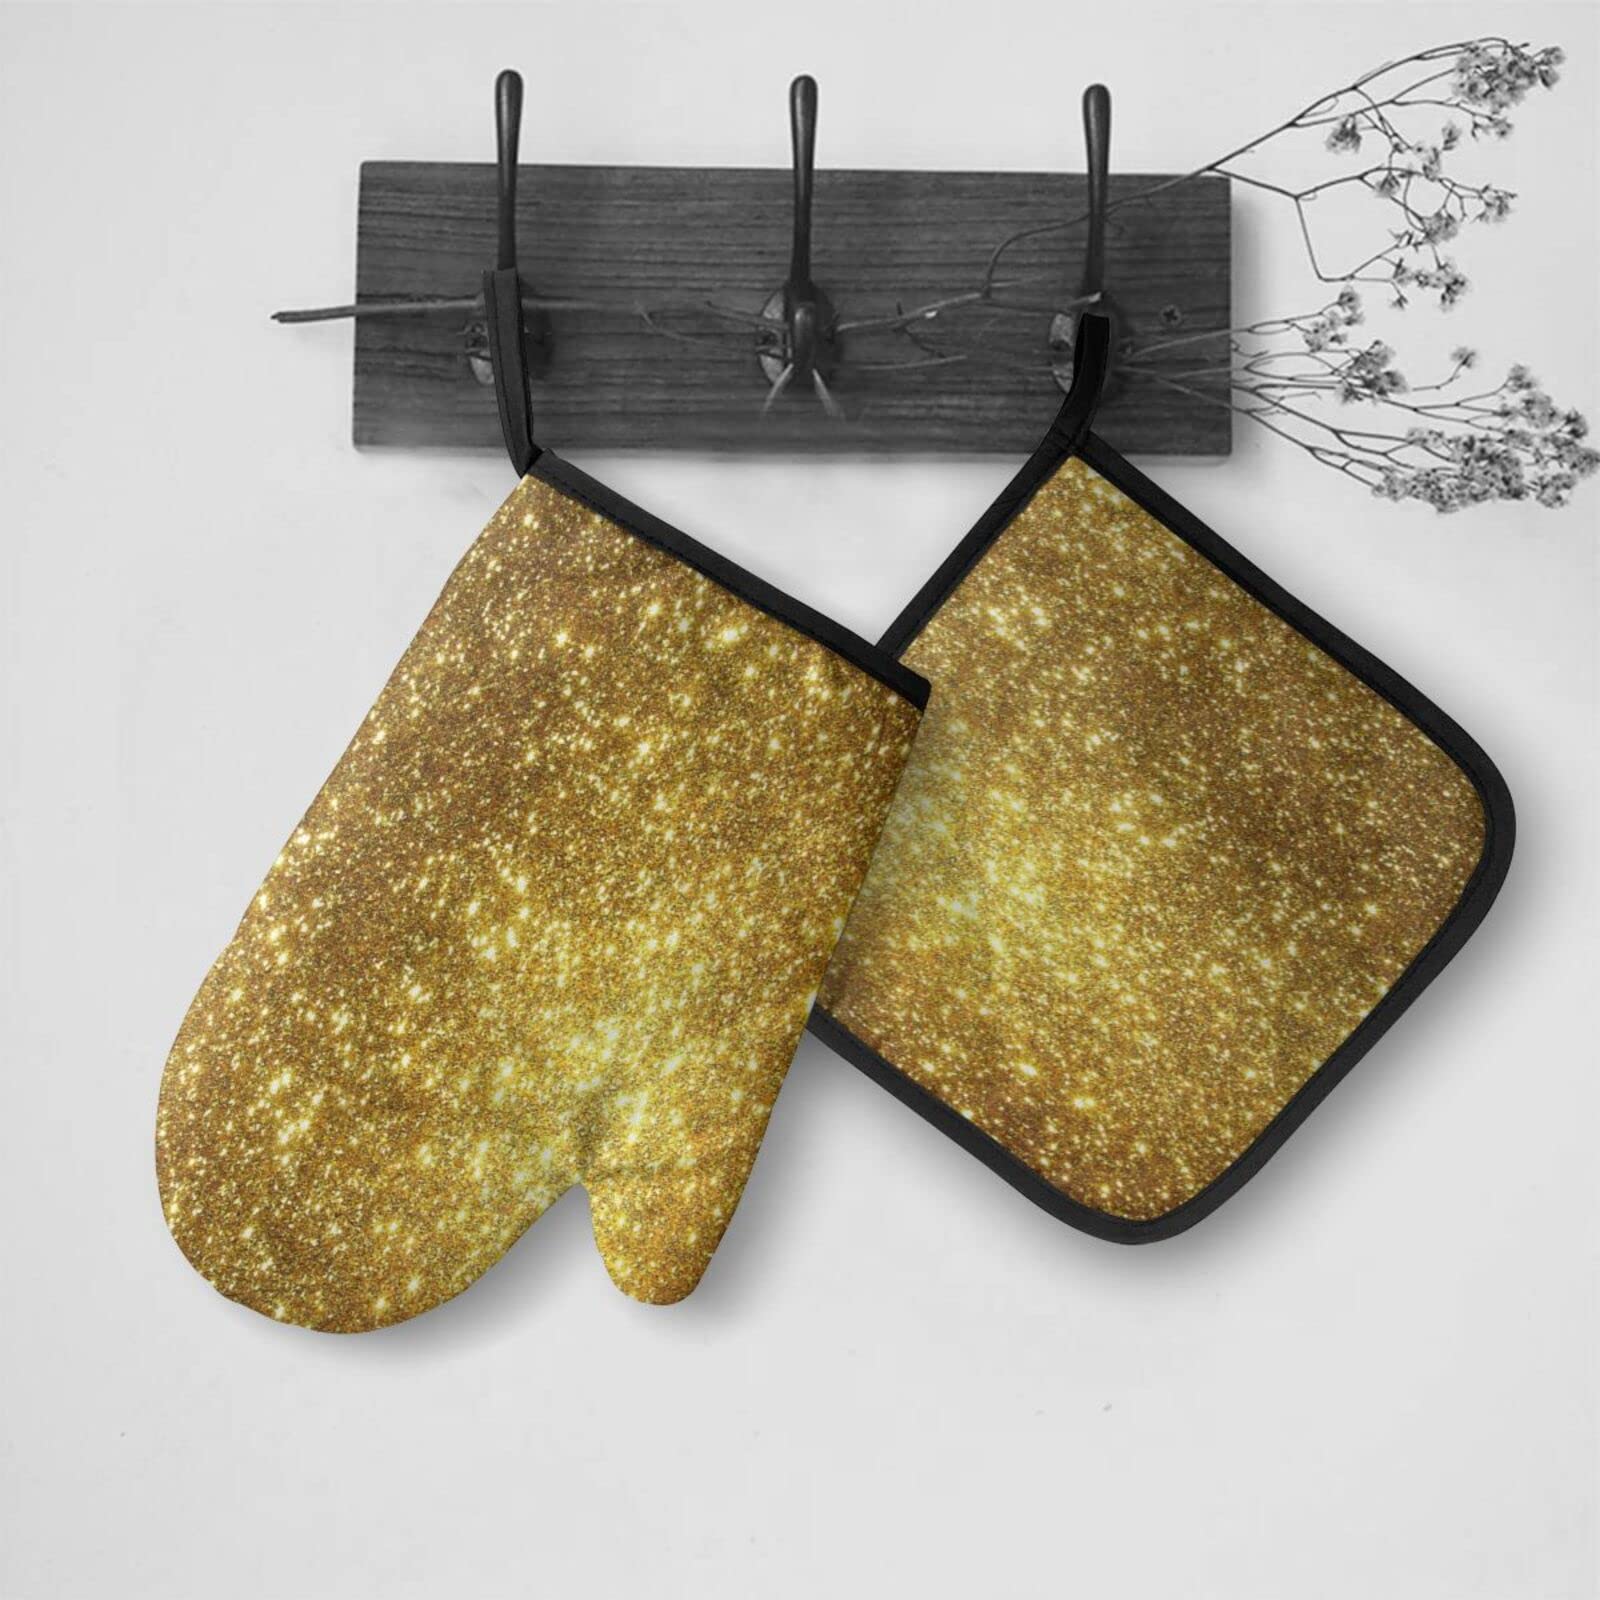 Gold Oven Mitts and Pot Holders Sets Heat Resistant 2 Pcs Kitchen Sets for Kitchen,Cooking,Baking,Grilling,Cooks Gifts